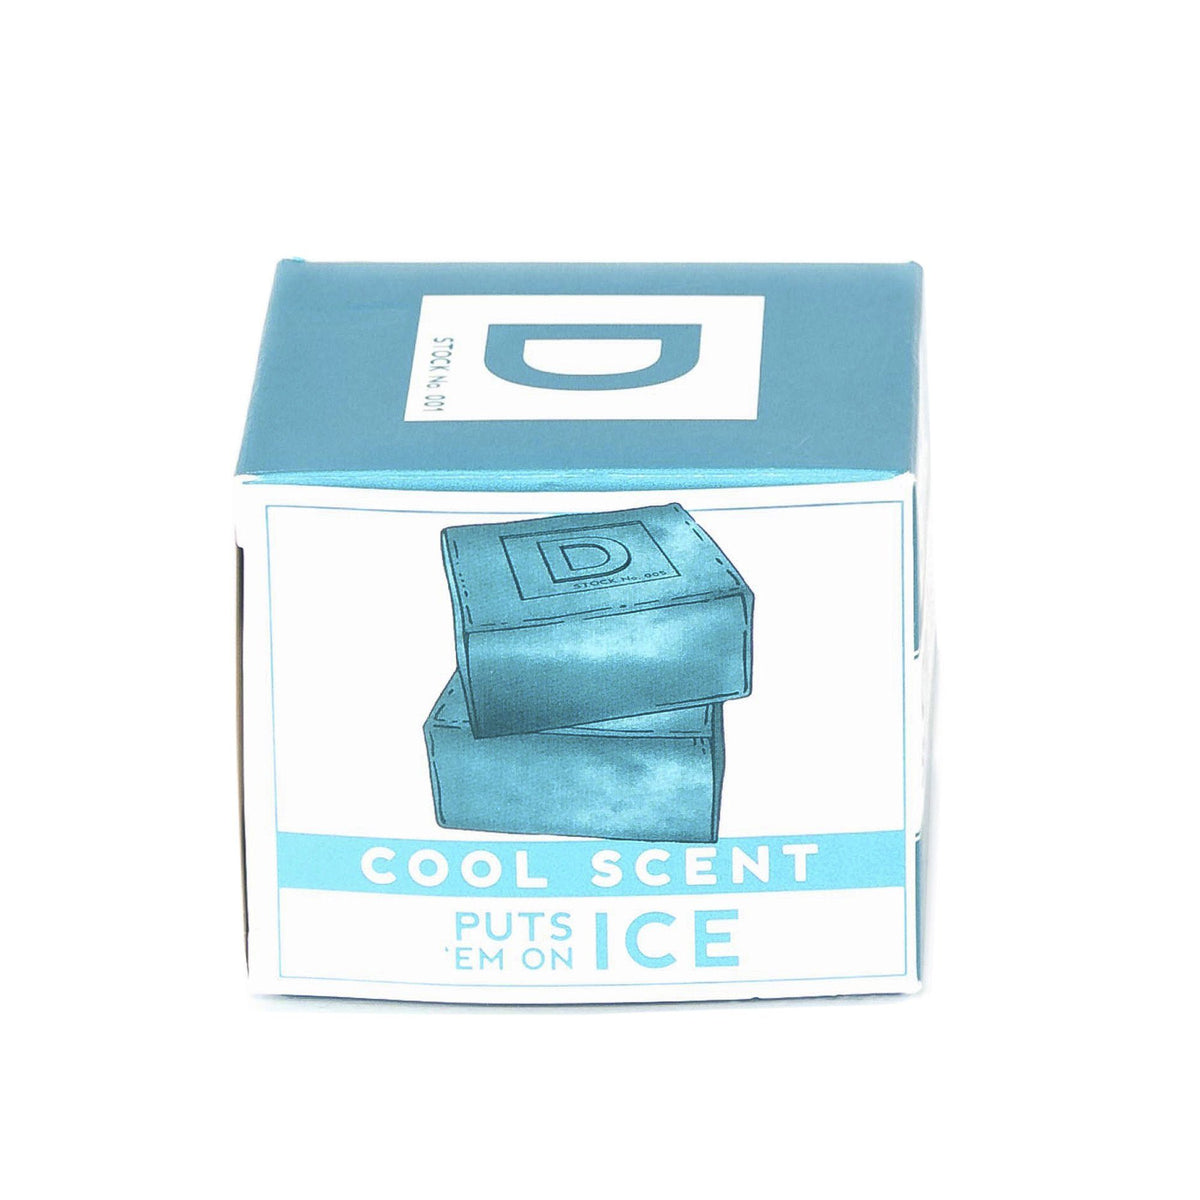 https://www.shopfendrihan.shop/wp-content/uploads/1691/38/be-inspired-and-look-through-our-duke-cannon-supply-co-cold-shower-cooling-soap-cubes-discontinued-collection-buy-now_3.jpg